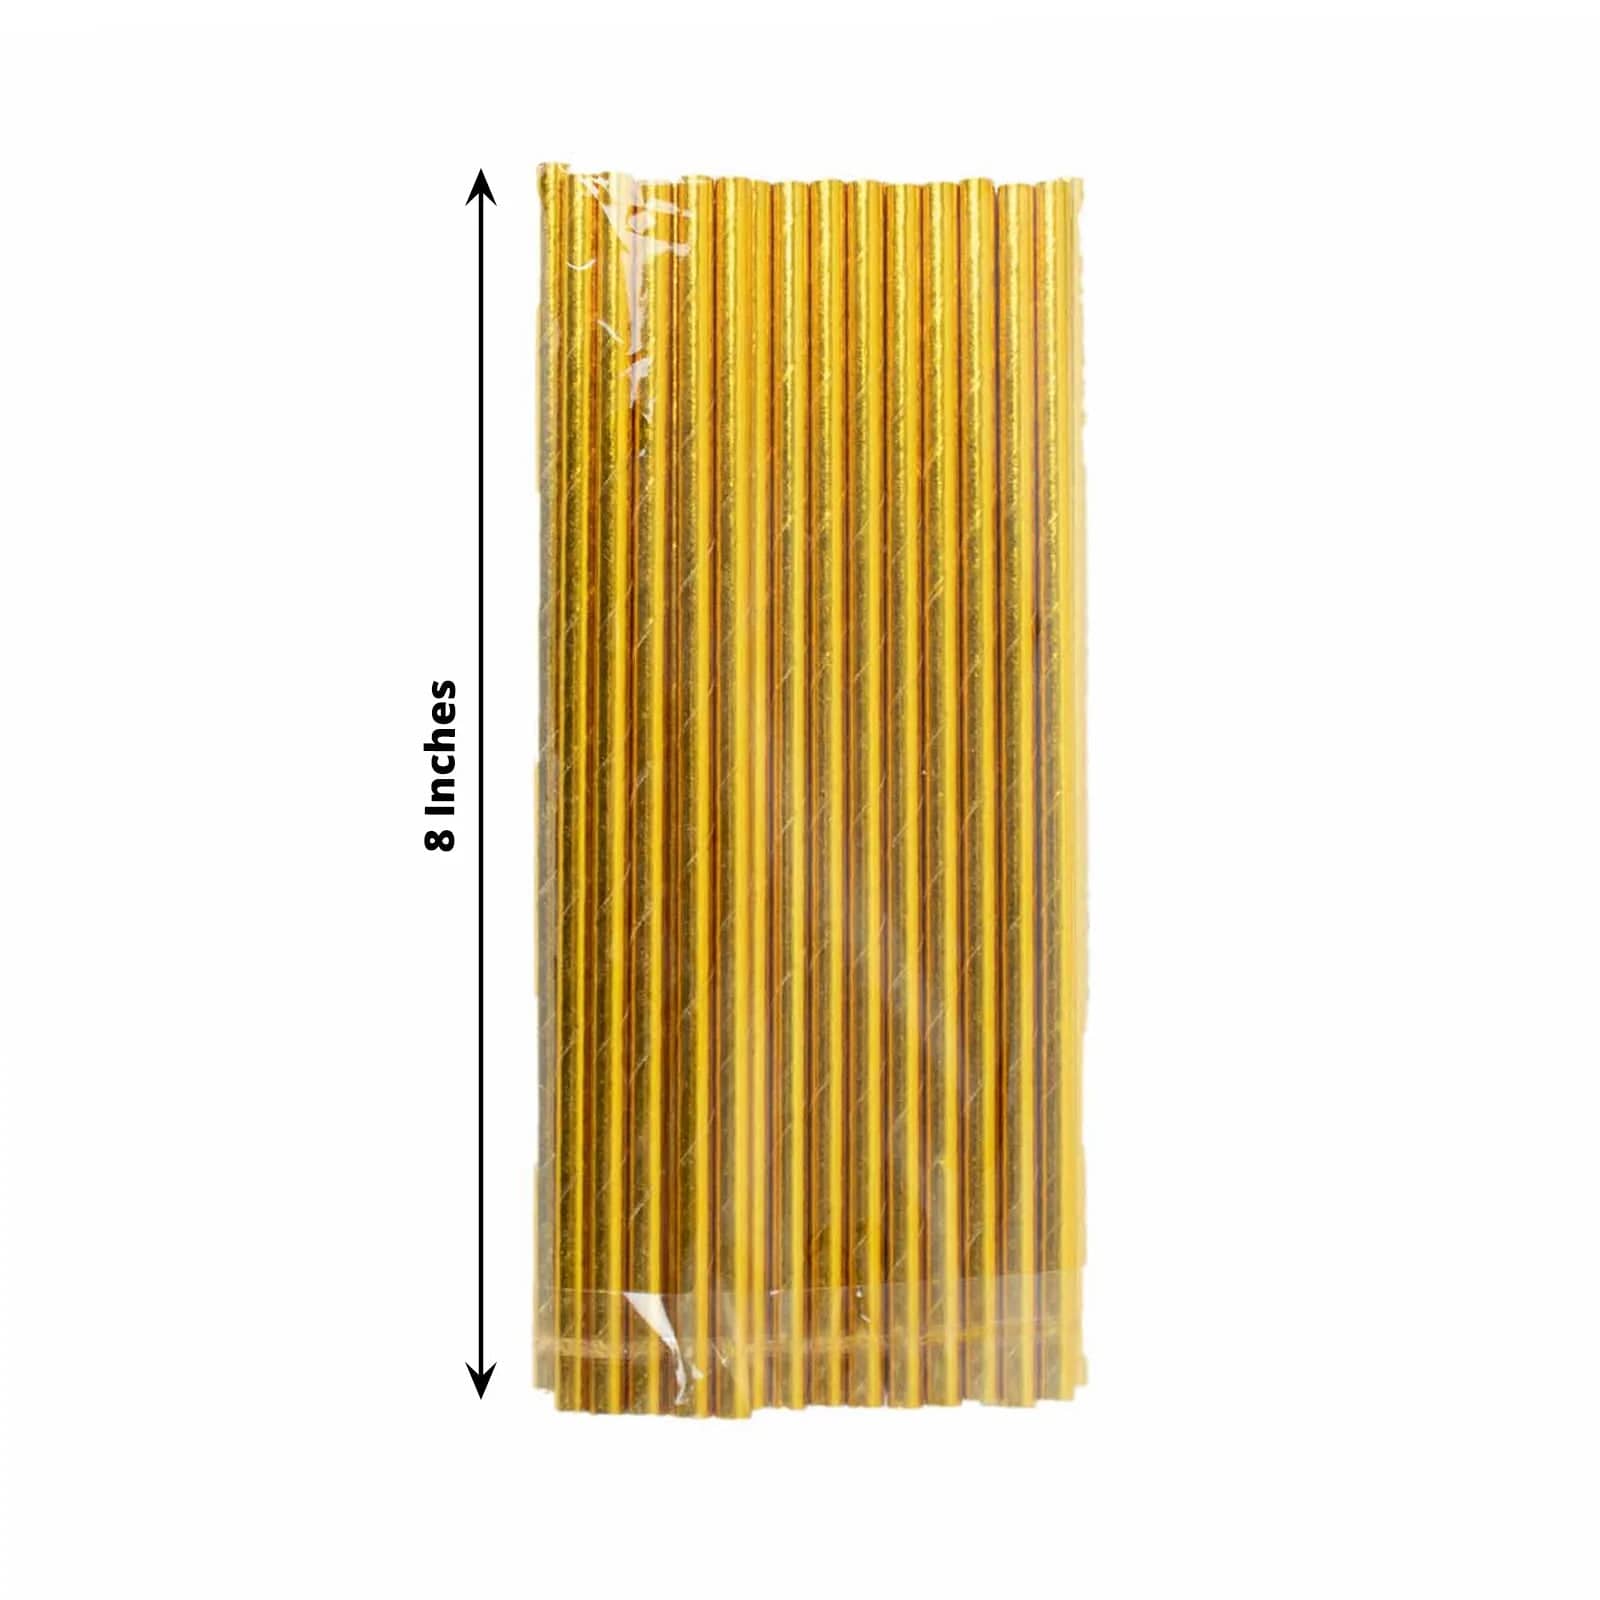 50 Gold 8 in Metallic Disposable Paper Drinking Straws